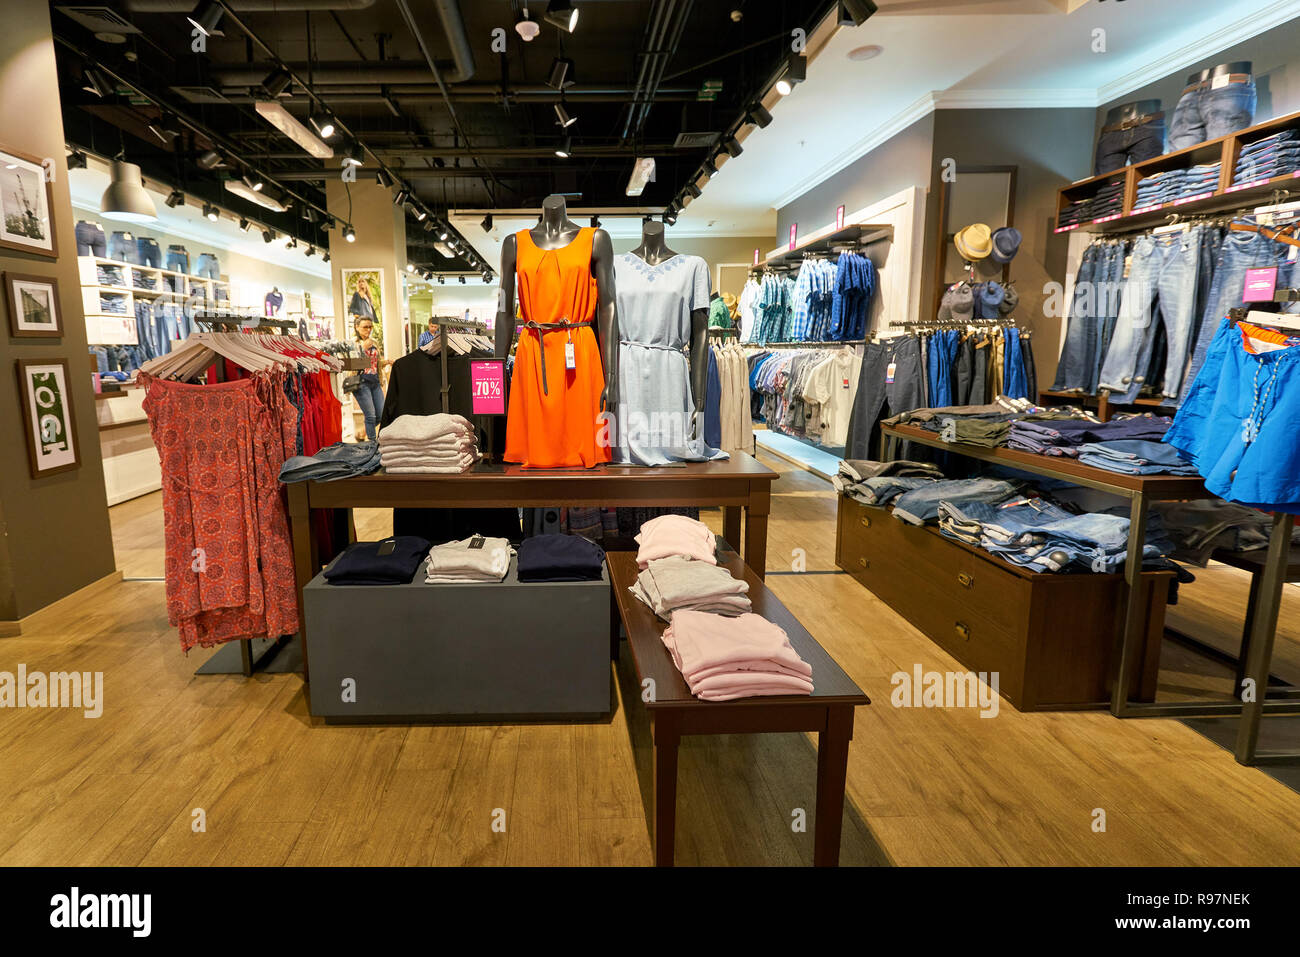 SAINT PETERSBURG, RUSSIA - CIRCA AUGUST, 2017: inside Tom Tailor store at  Galeria shopping center. Tom Tailor is a German lifestyle clothing company  Stock Photo - Alamy